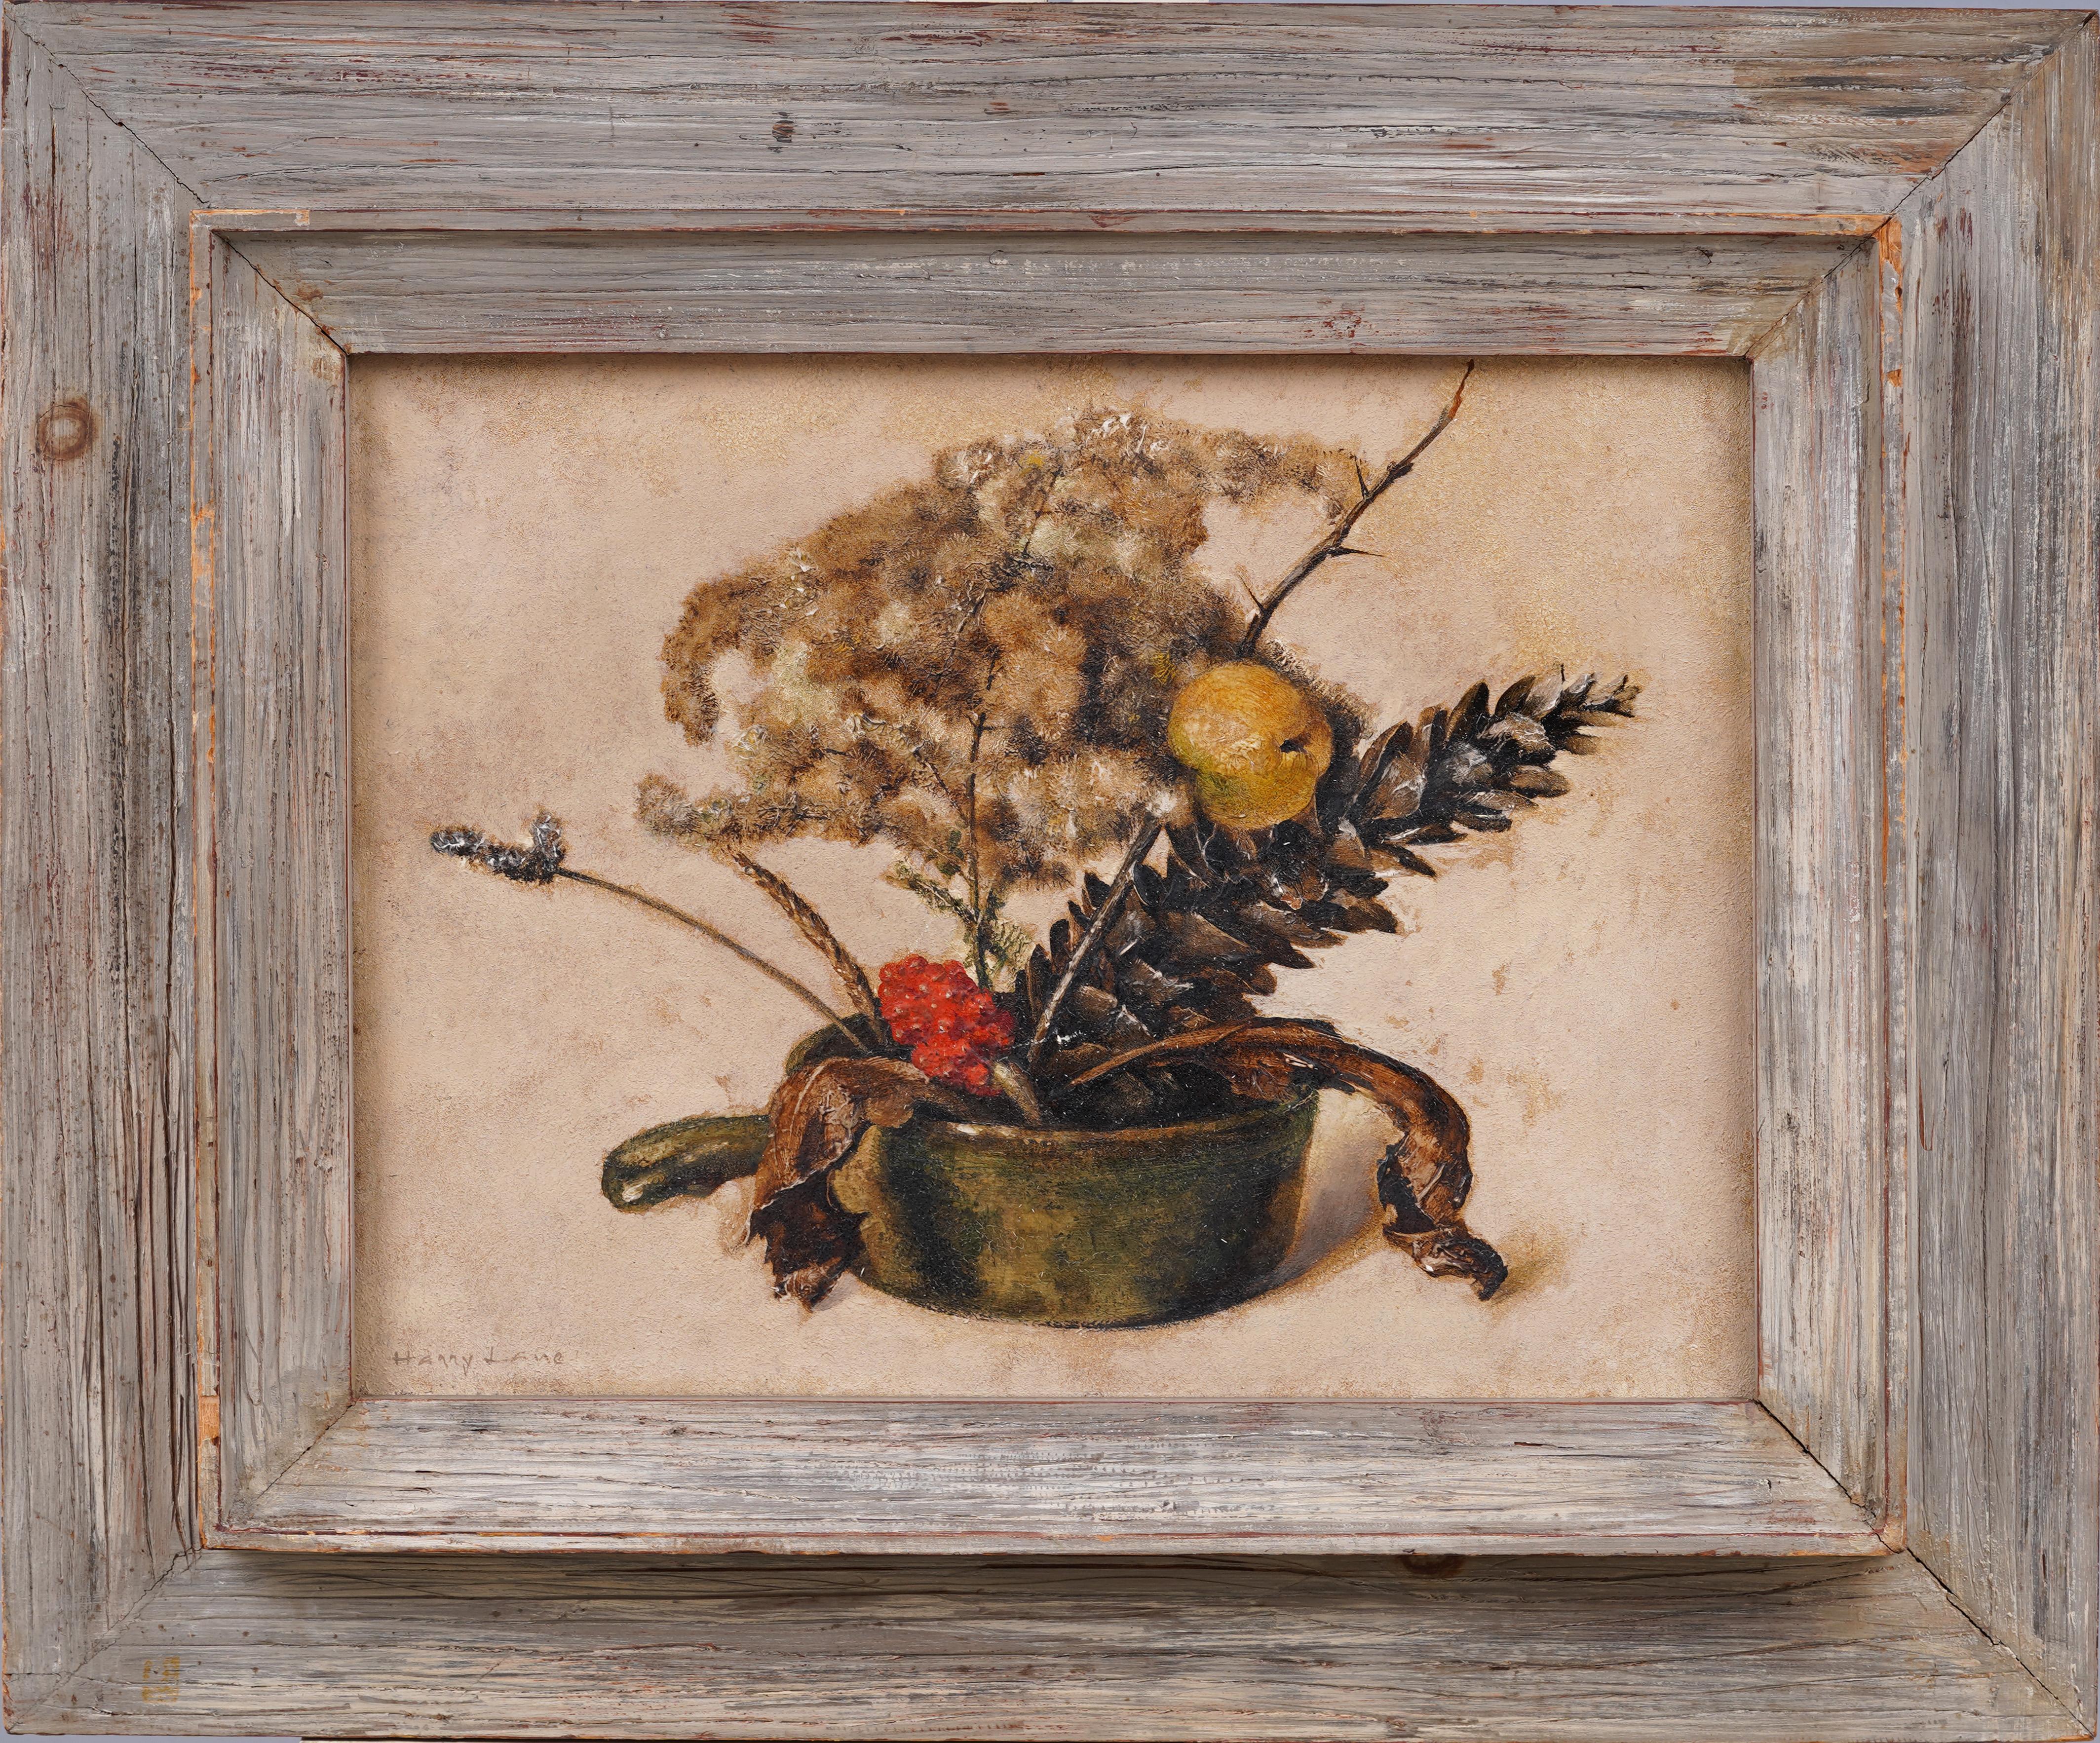 Really rare and well painted American still life by Harry Lane (1891 - 1973).  Oil on board.  Framed in a period modernist wood frame.  Signed.  Image size, 12 by 16 inches.  


Artist Bio

